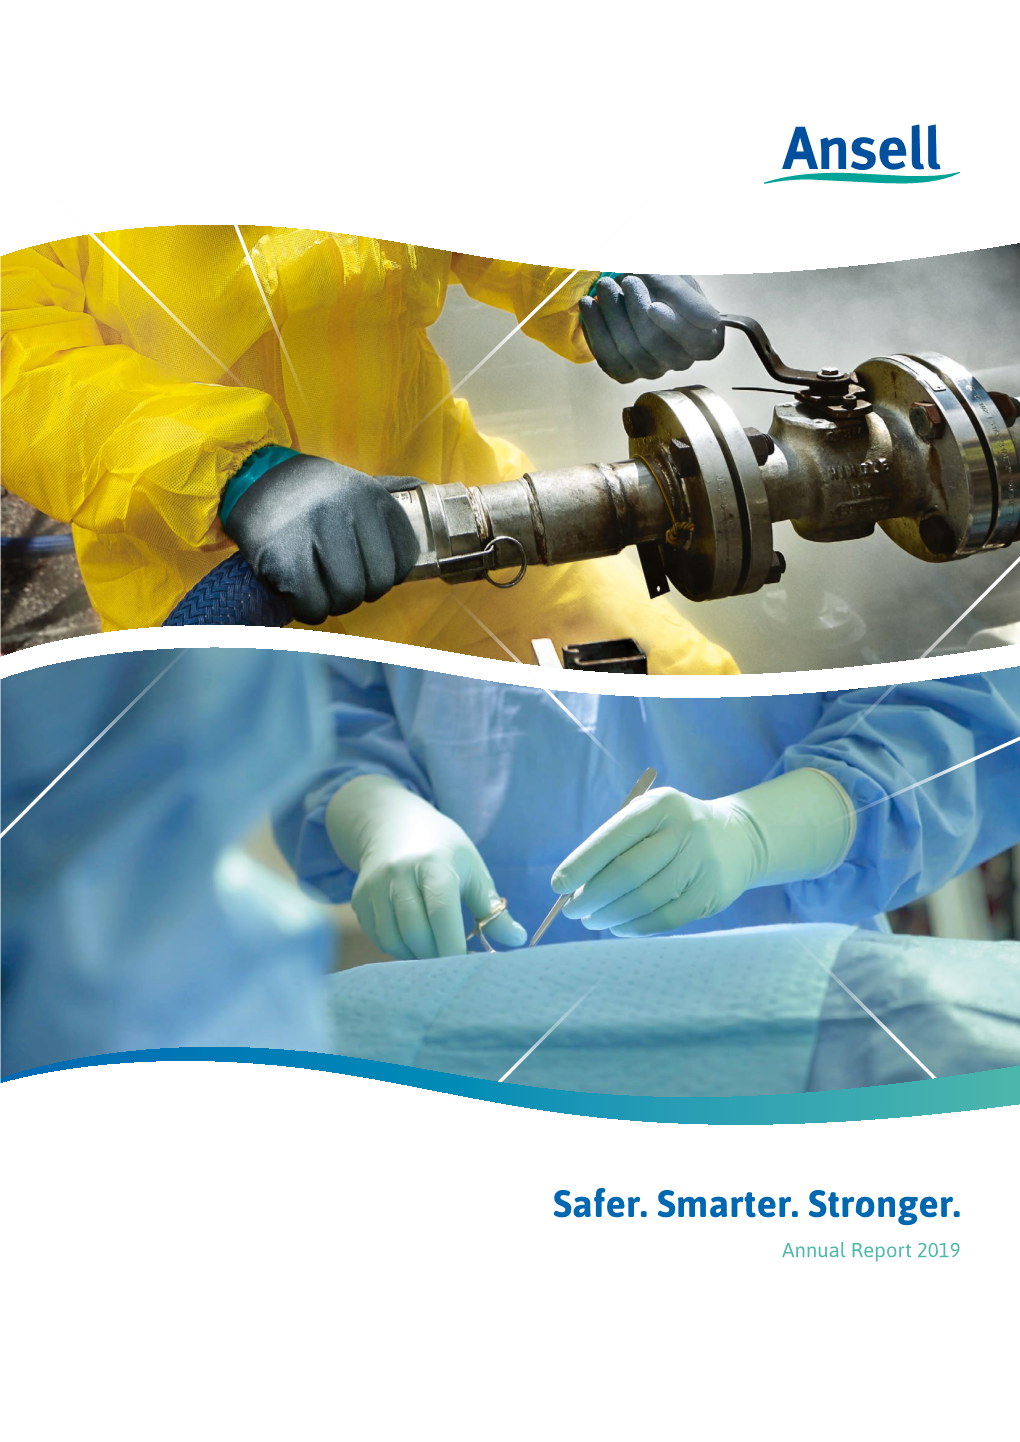 Safer. Smarter. Stronger. Annual Report 2019 Contents